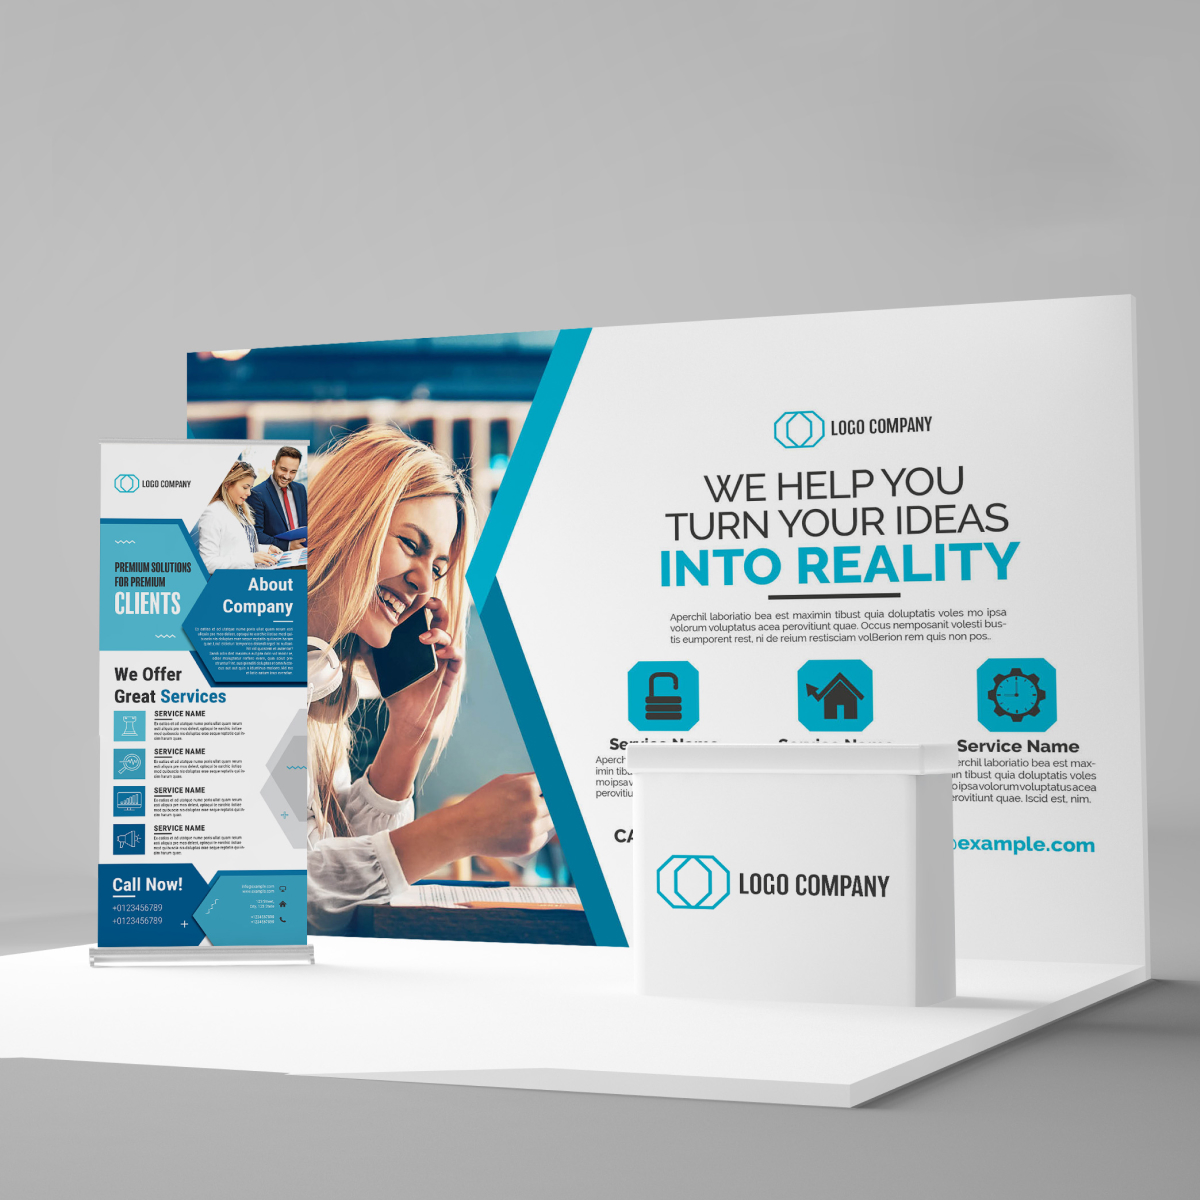 The Stand Roll-up: The POS Support For All Your Exhibitions